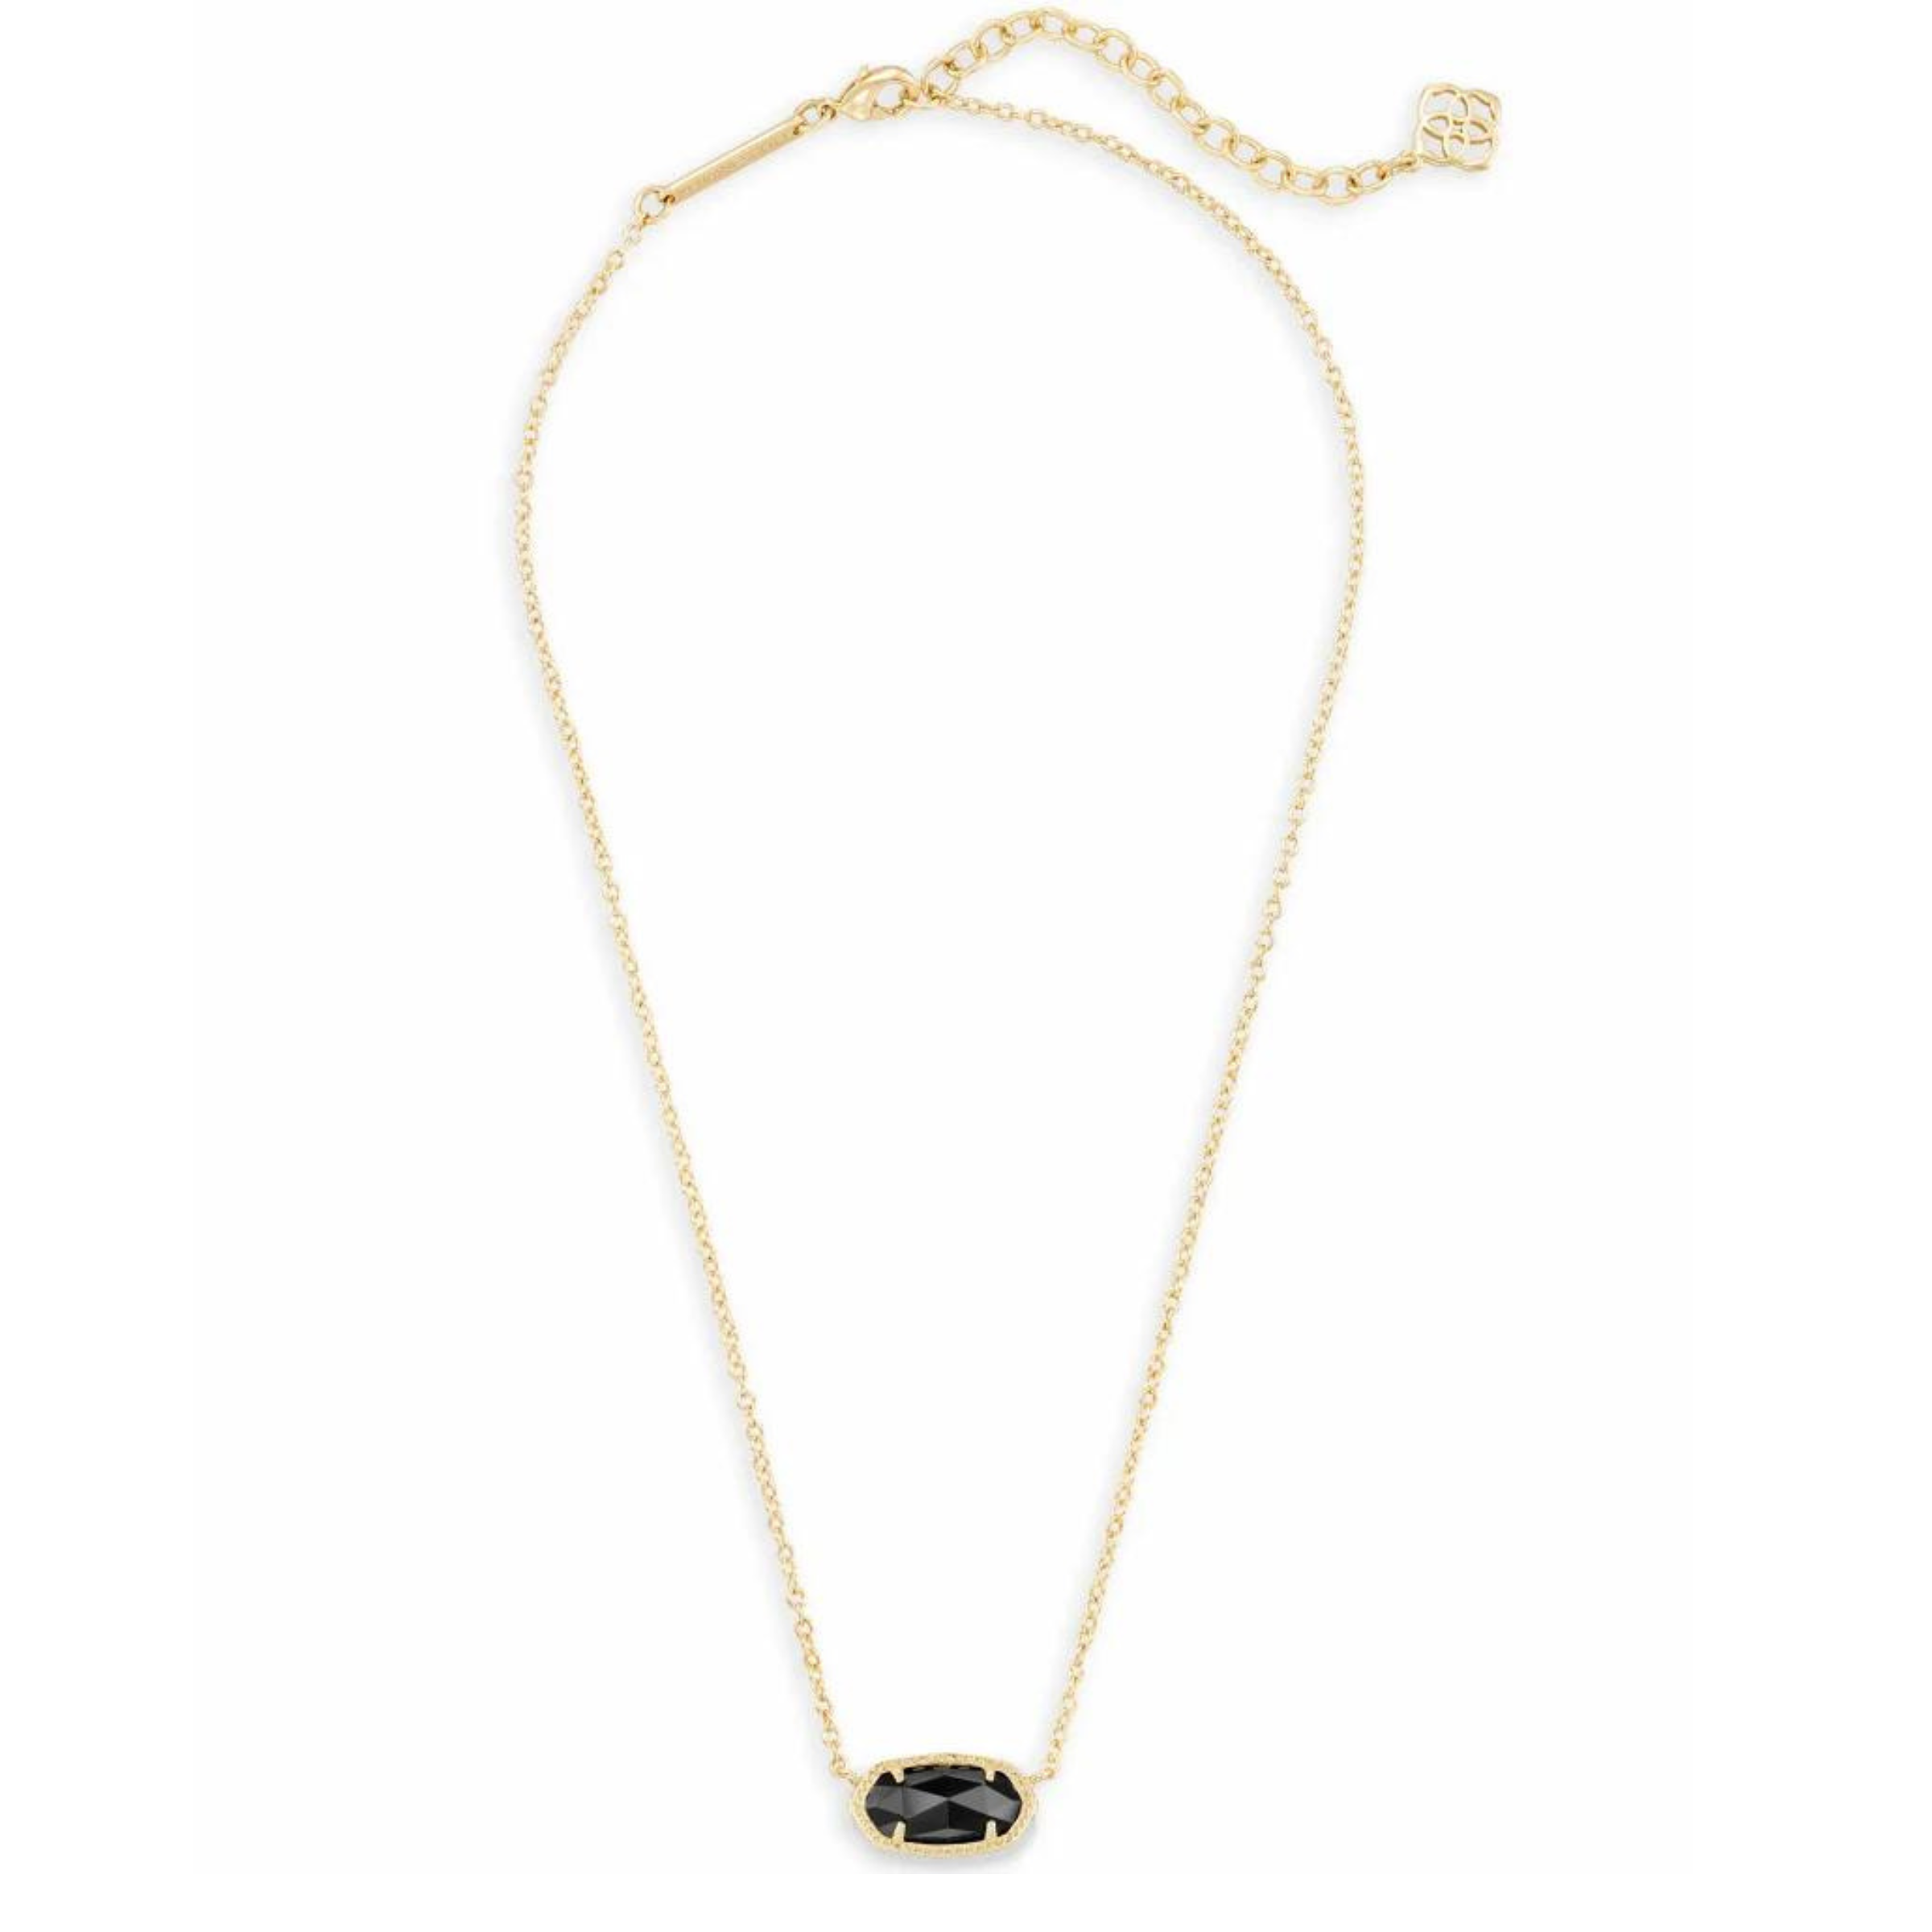 Kendra Scott | Elisa Gold Pendant Necklace in Black Opaque Glass - Giddy Up Glamour Boutique